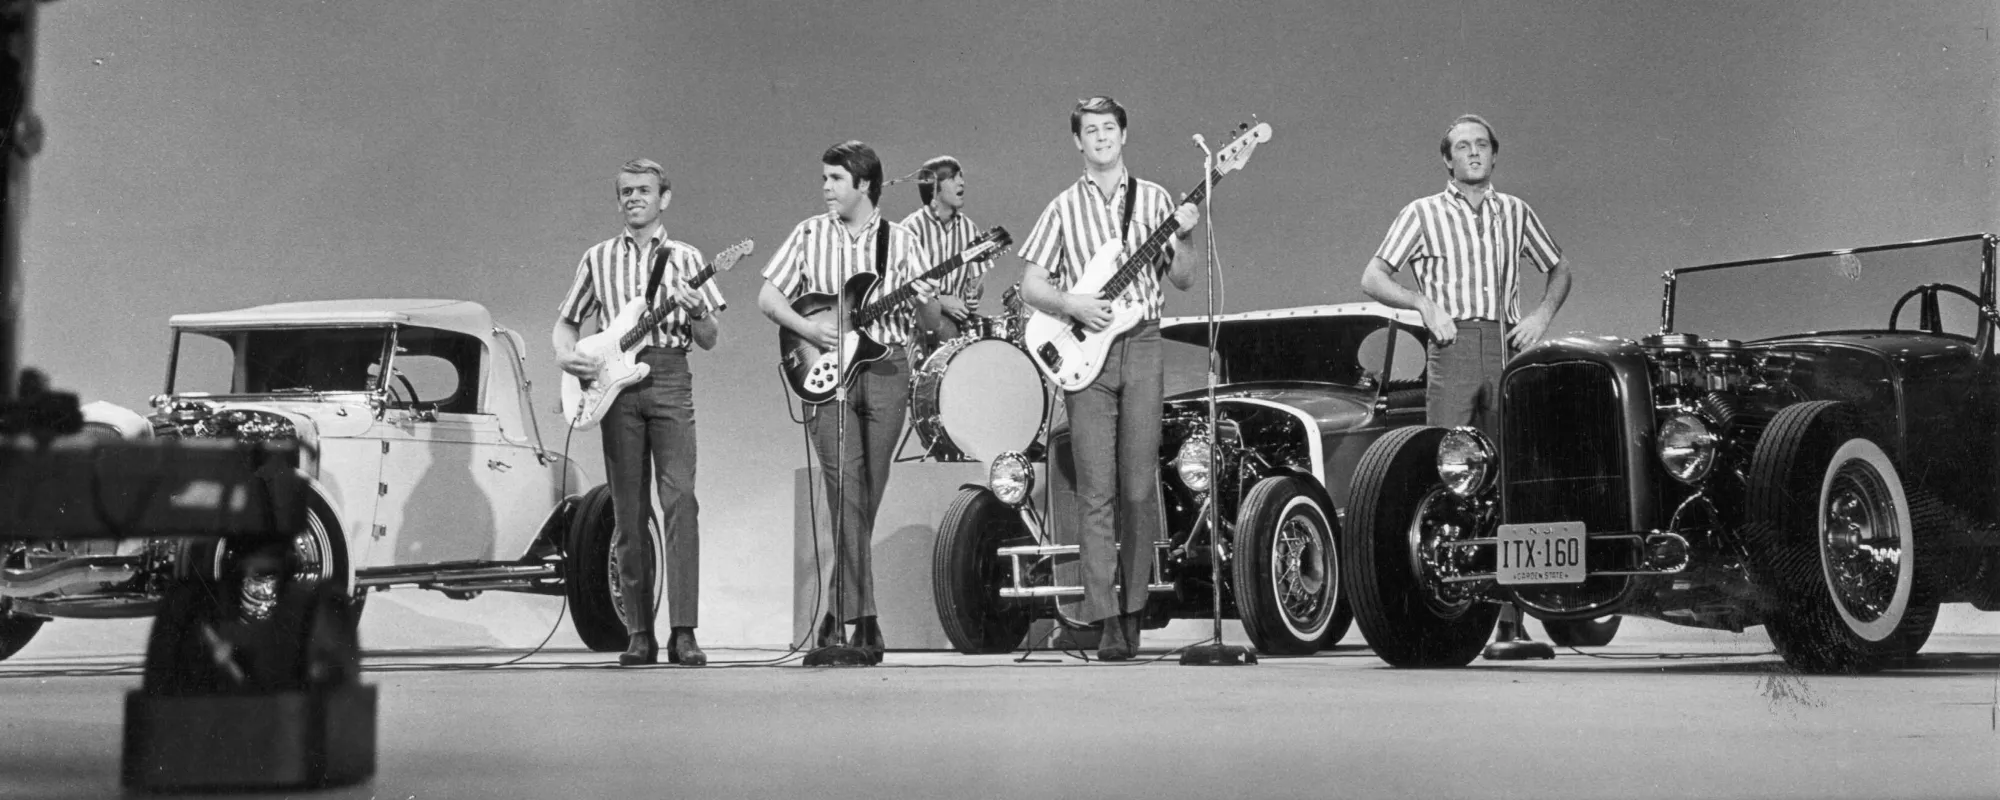 Fending off the Invaders: The Story Behind “Fun, Fun, Fun” by The Beach Boys